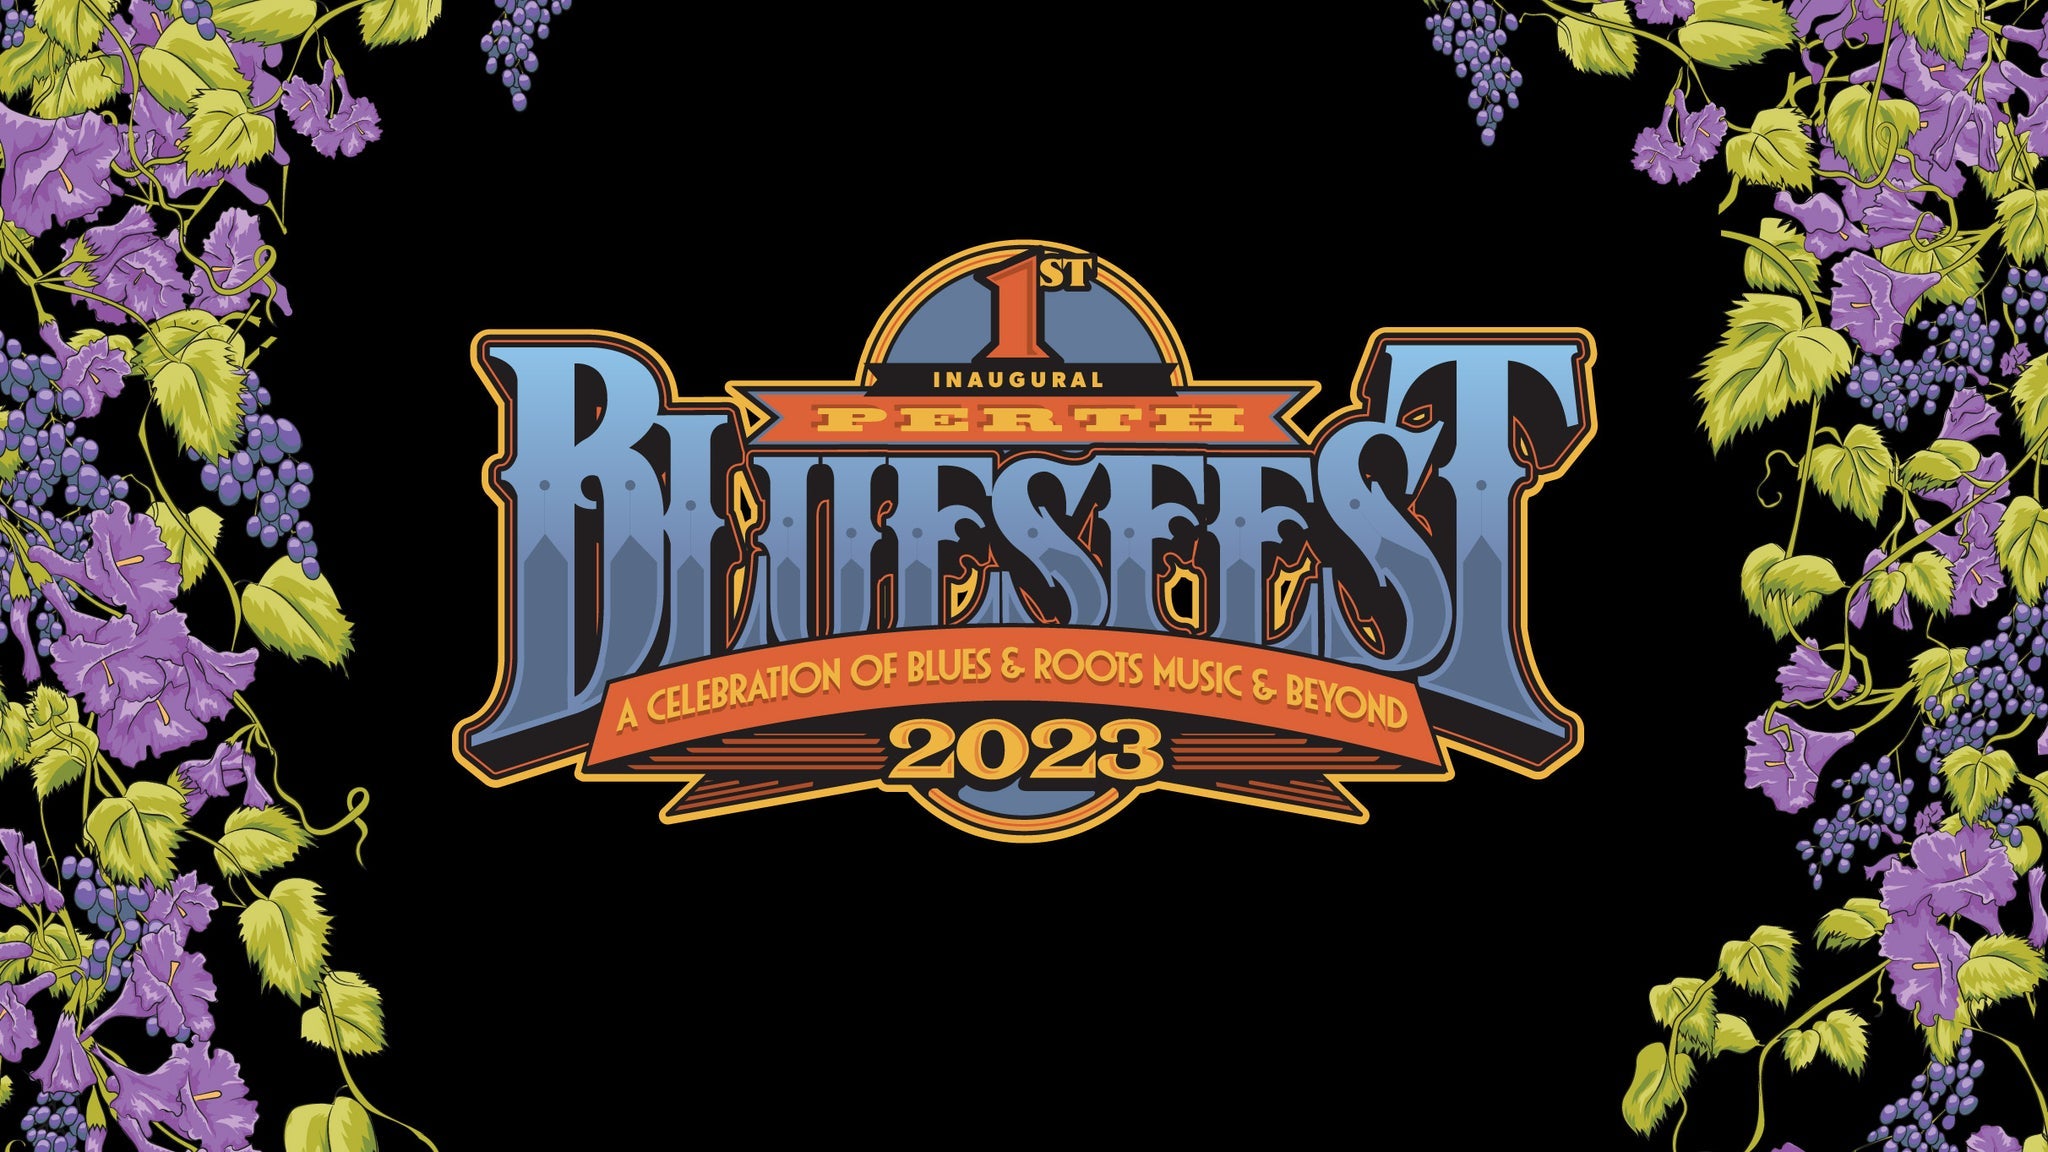 Image used with permission from Ticketmaster | Bluesfest Perth tickets